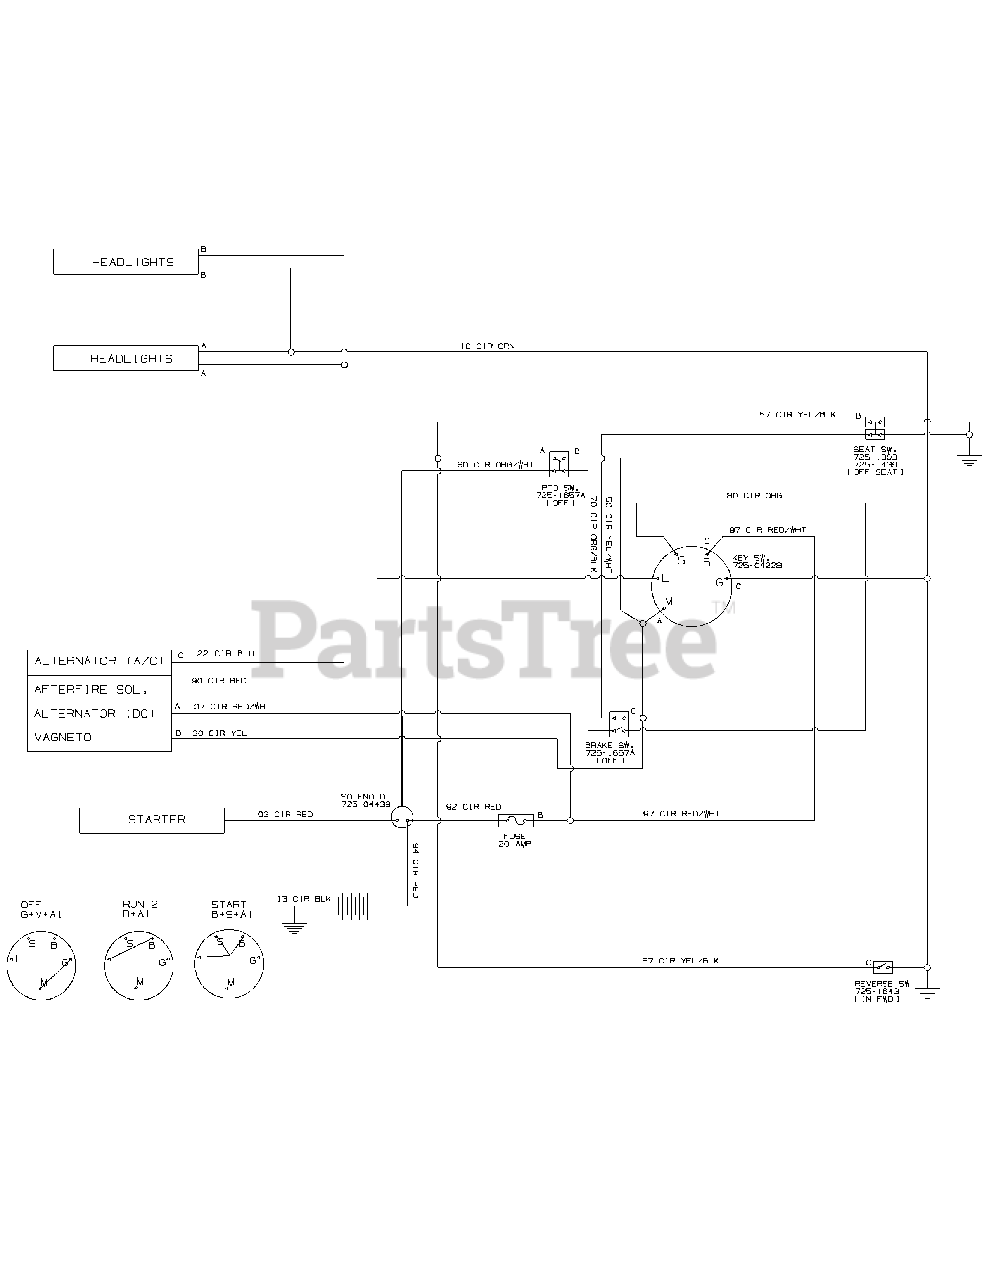 Wiring diagrams for Deere Tractor product identification number is  L06200H150106